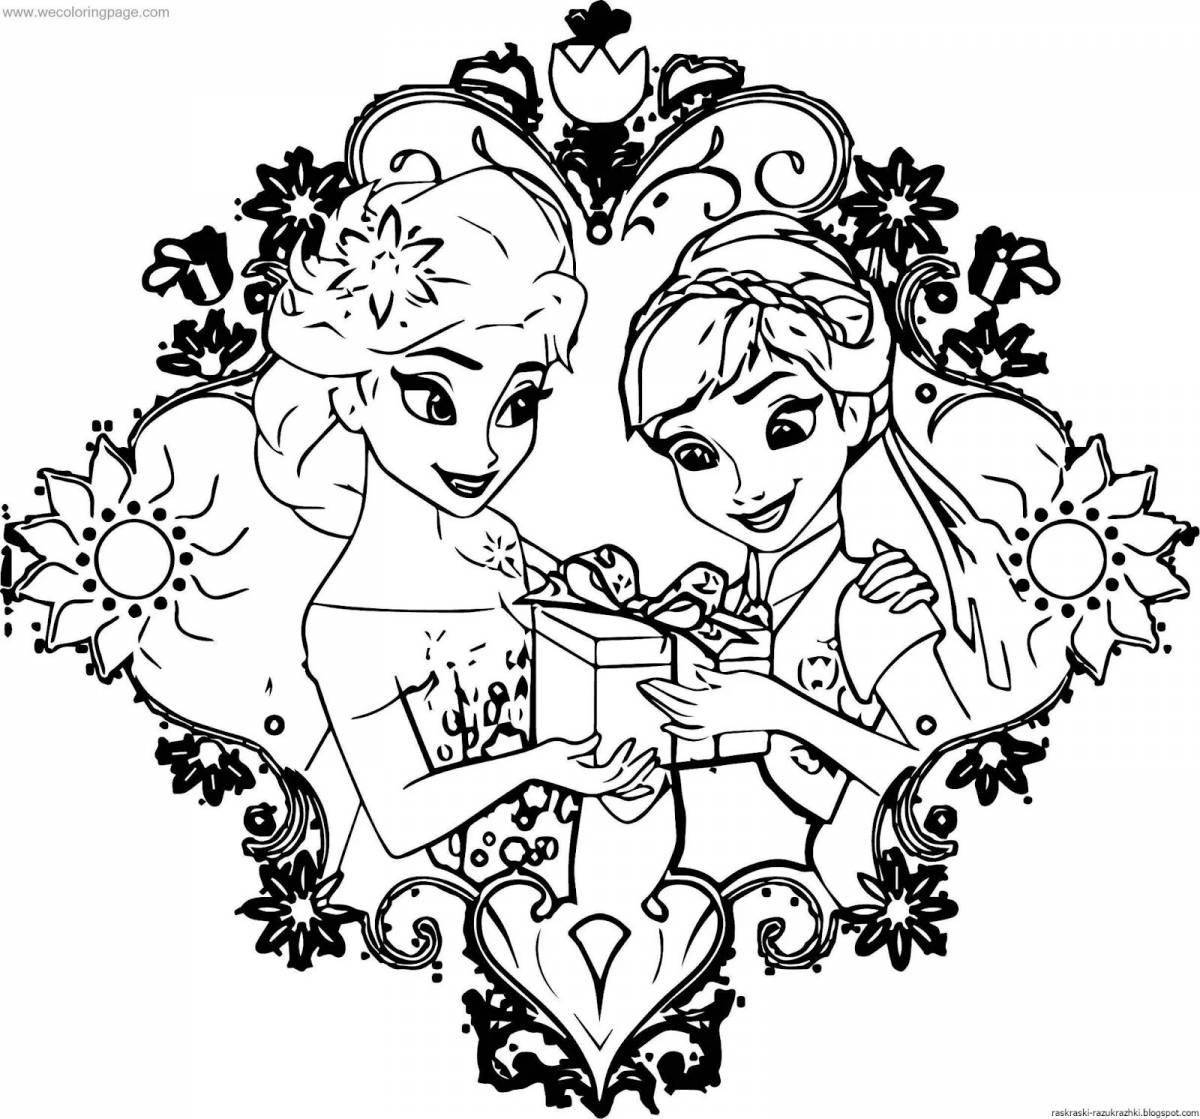 Cute two sisters coloring book